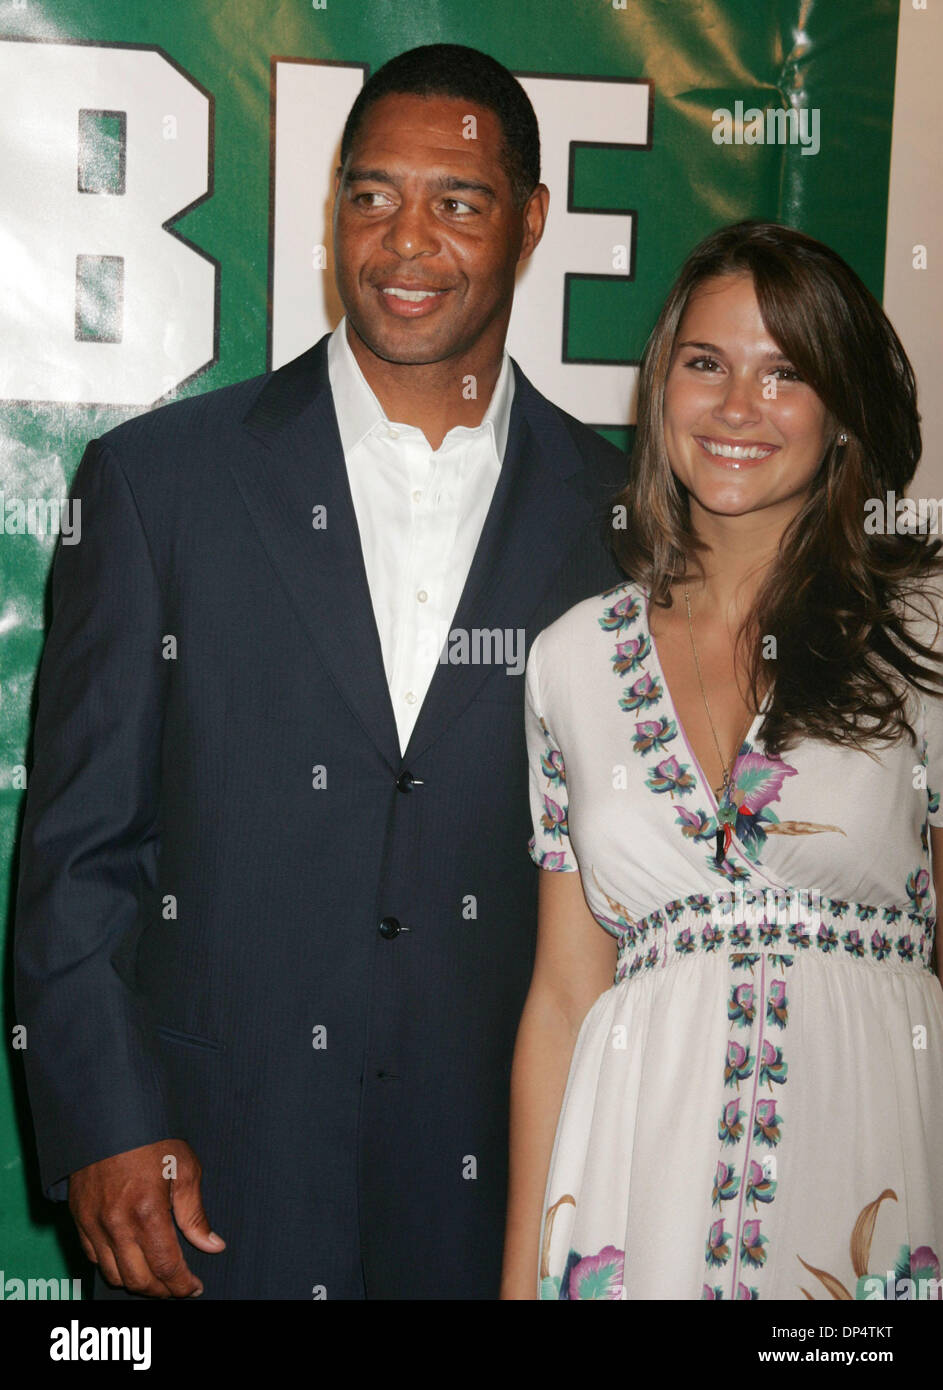 Aug 23, 2006; New York, NY, USA; Football player MARCUS ALLEN and WIFE at the arrivals for the New York premiere of 'Invincible' held at the Ziegfeld Theater. Mandatory Credit: Photo by Nancy Kaszerman/ZUMA Press. (©) Copyright 2006 by Nancy Kaszerman Stock Photo